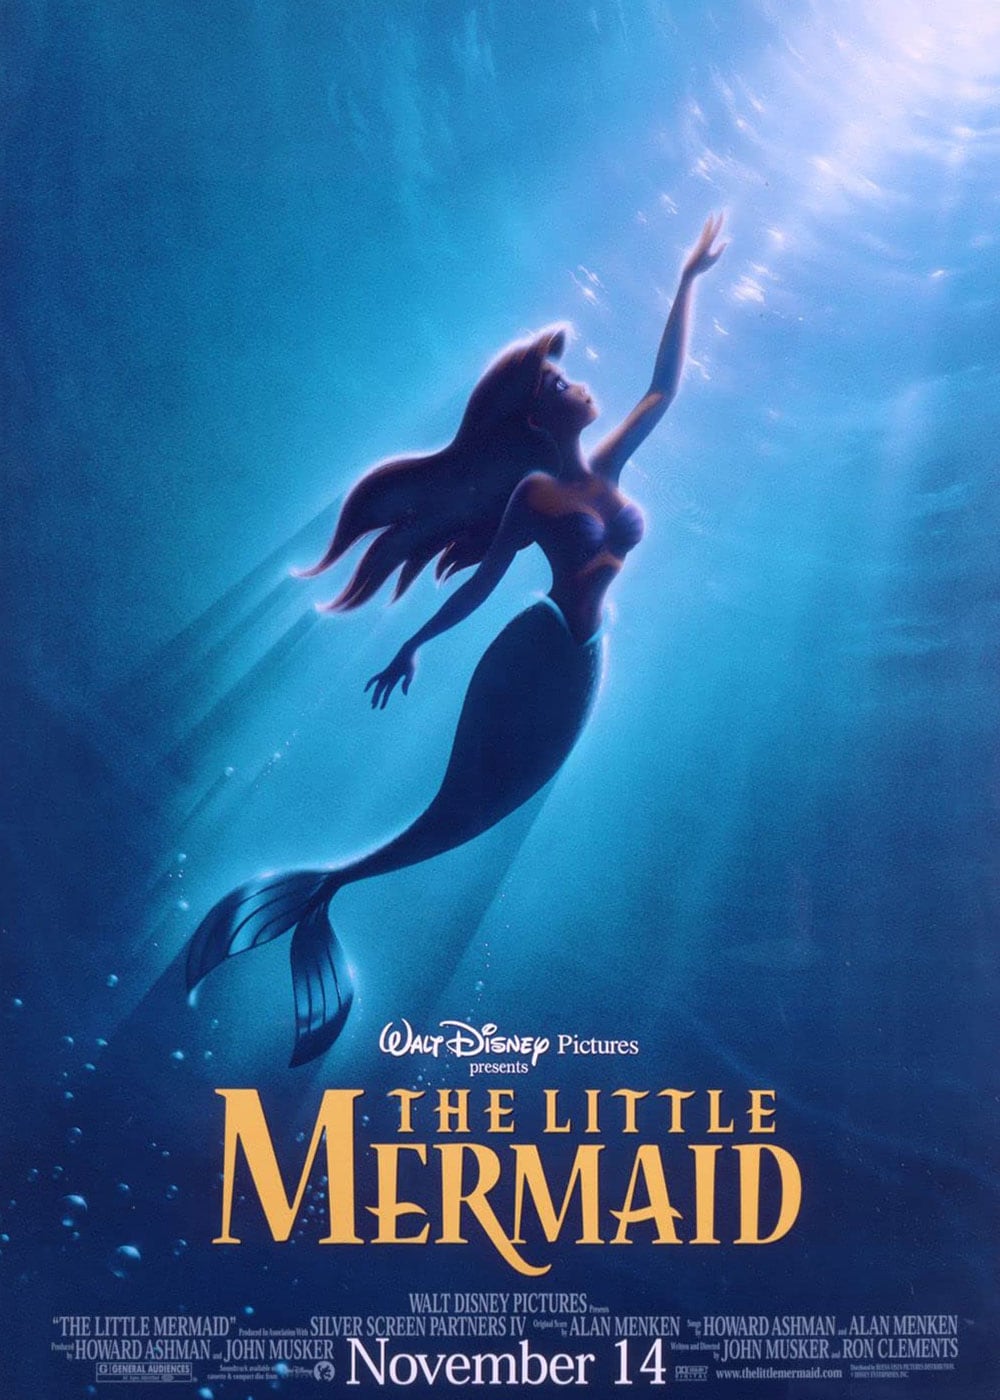 andrew biggy recommends the mermaid full movie in hindi pic